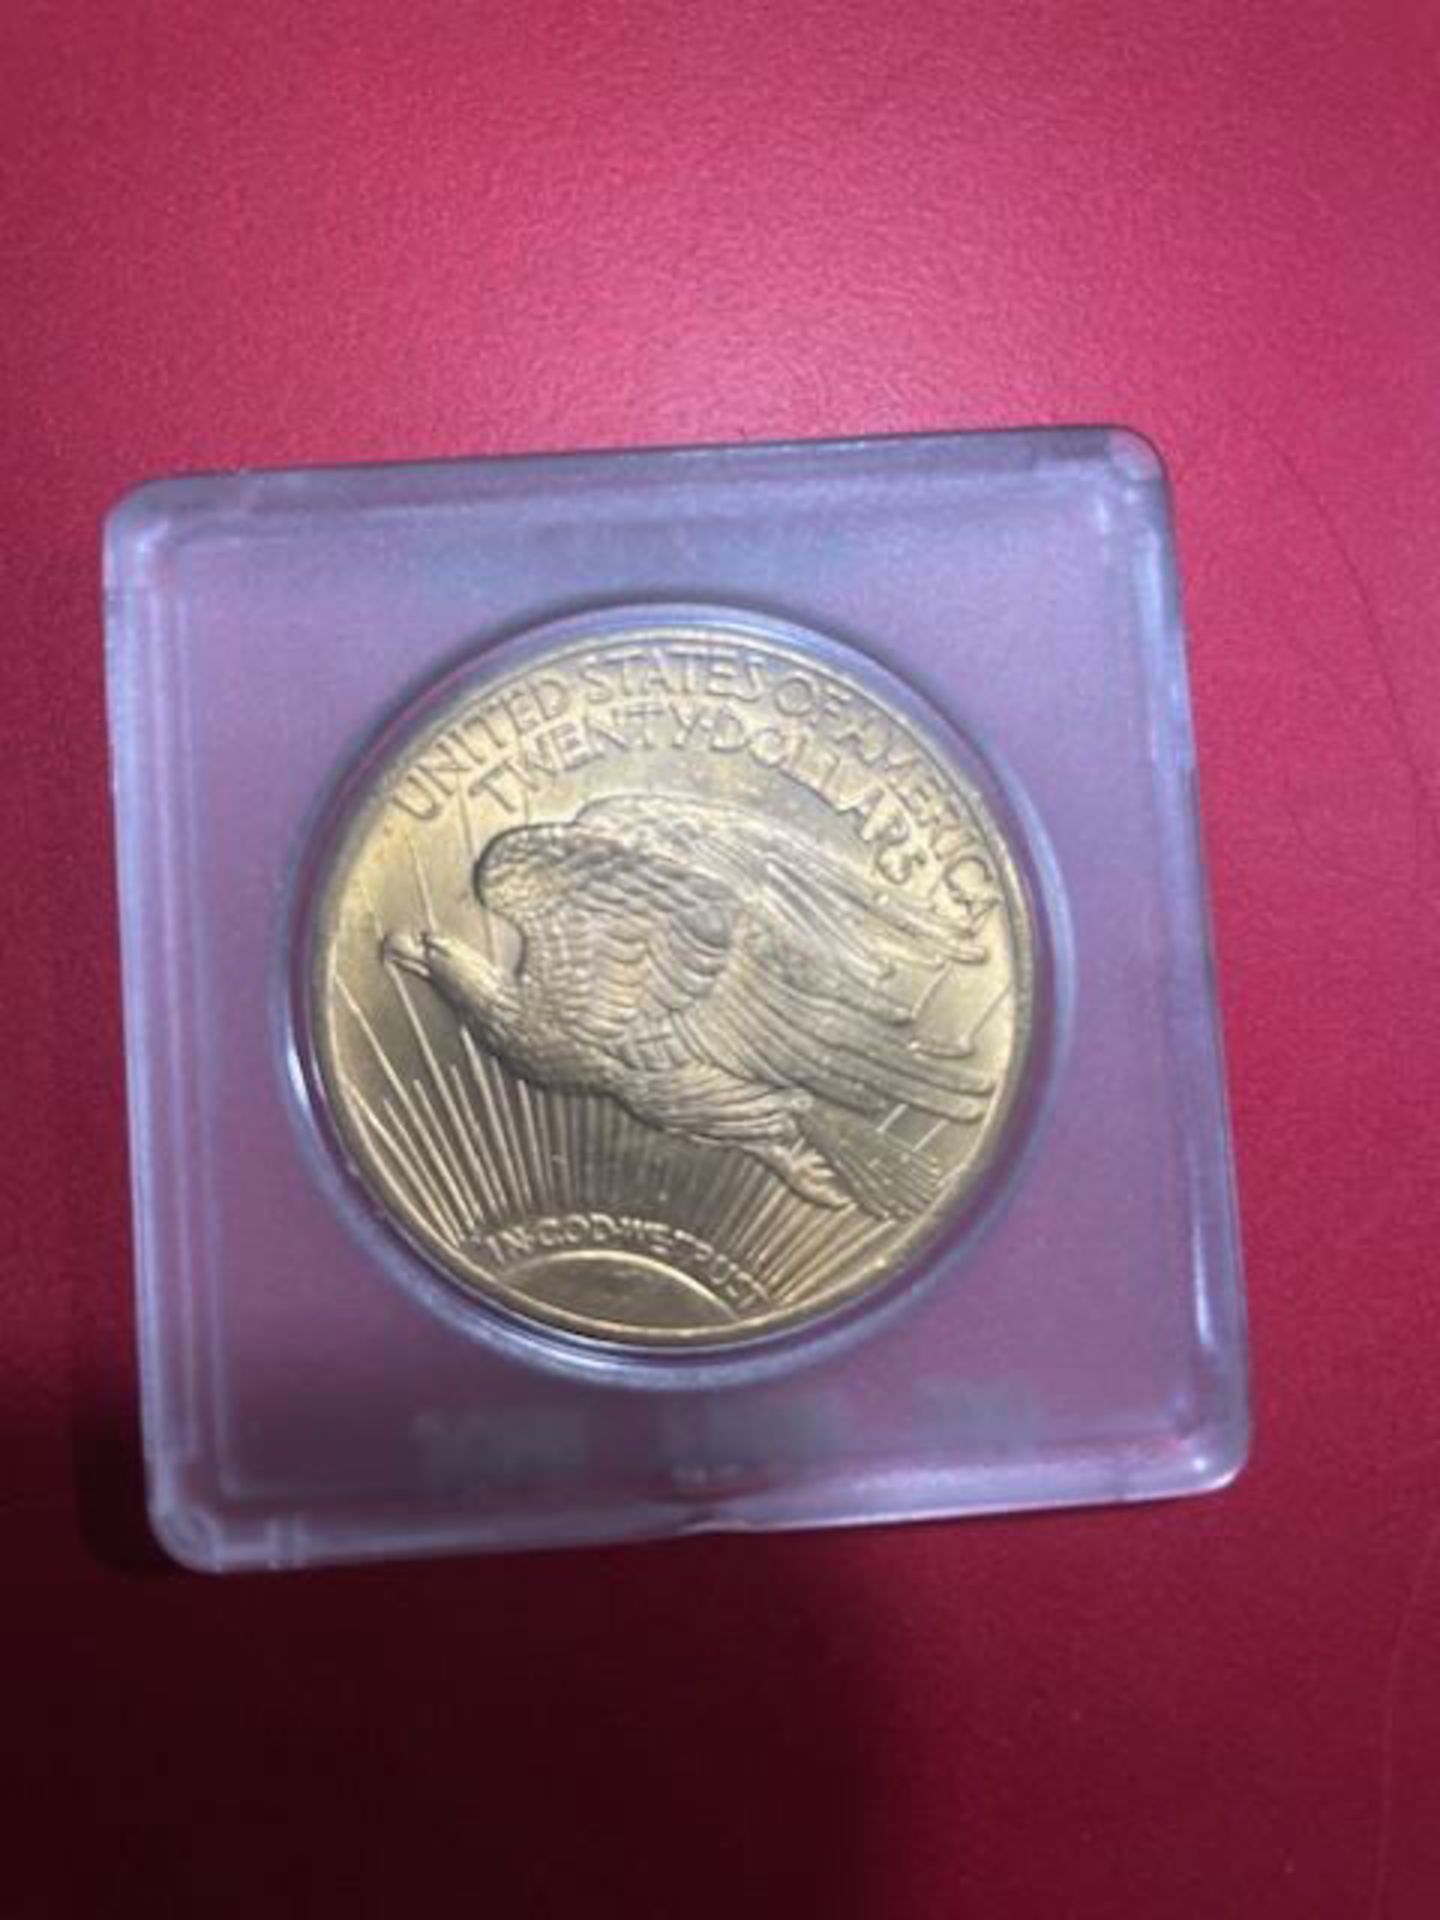 1928 St. Gaudens Double Eagle $20 Gold Coin - Image 11 of 12